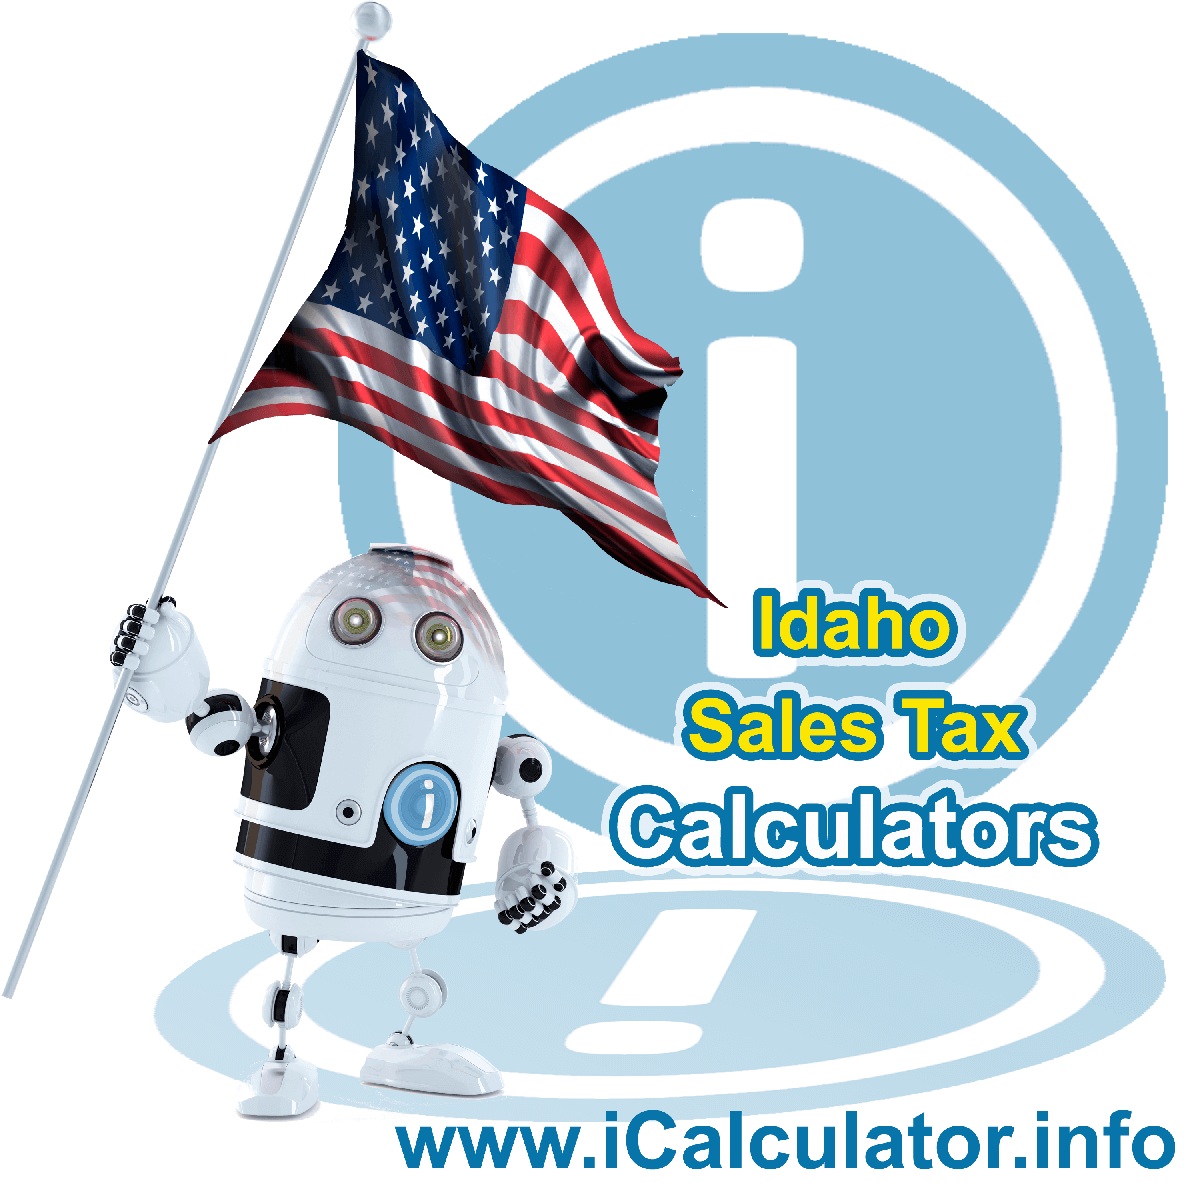 Post Falls Sales Rates: This image illustrates a calculator robot calculating Post Falls sales tax manually using the Post Falls Sales Tax Formula. You can use this information to calculate Post Falls Sales Tax manually or use the Post Falls Sales Tax Calculator to calculate sales tax online.